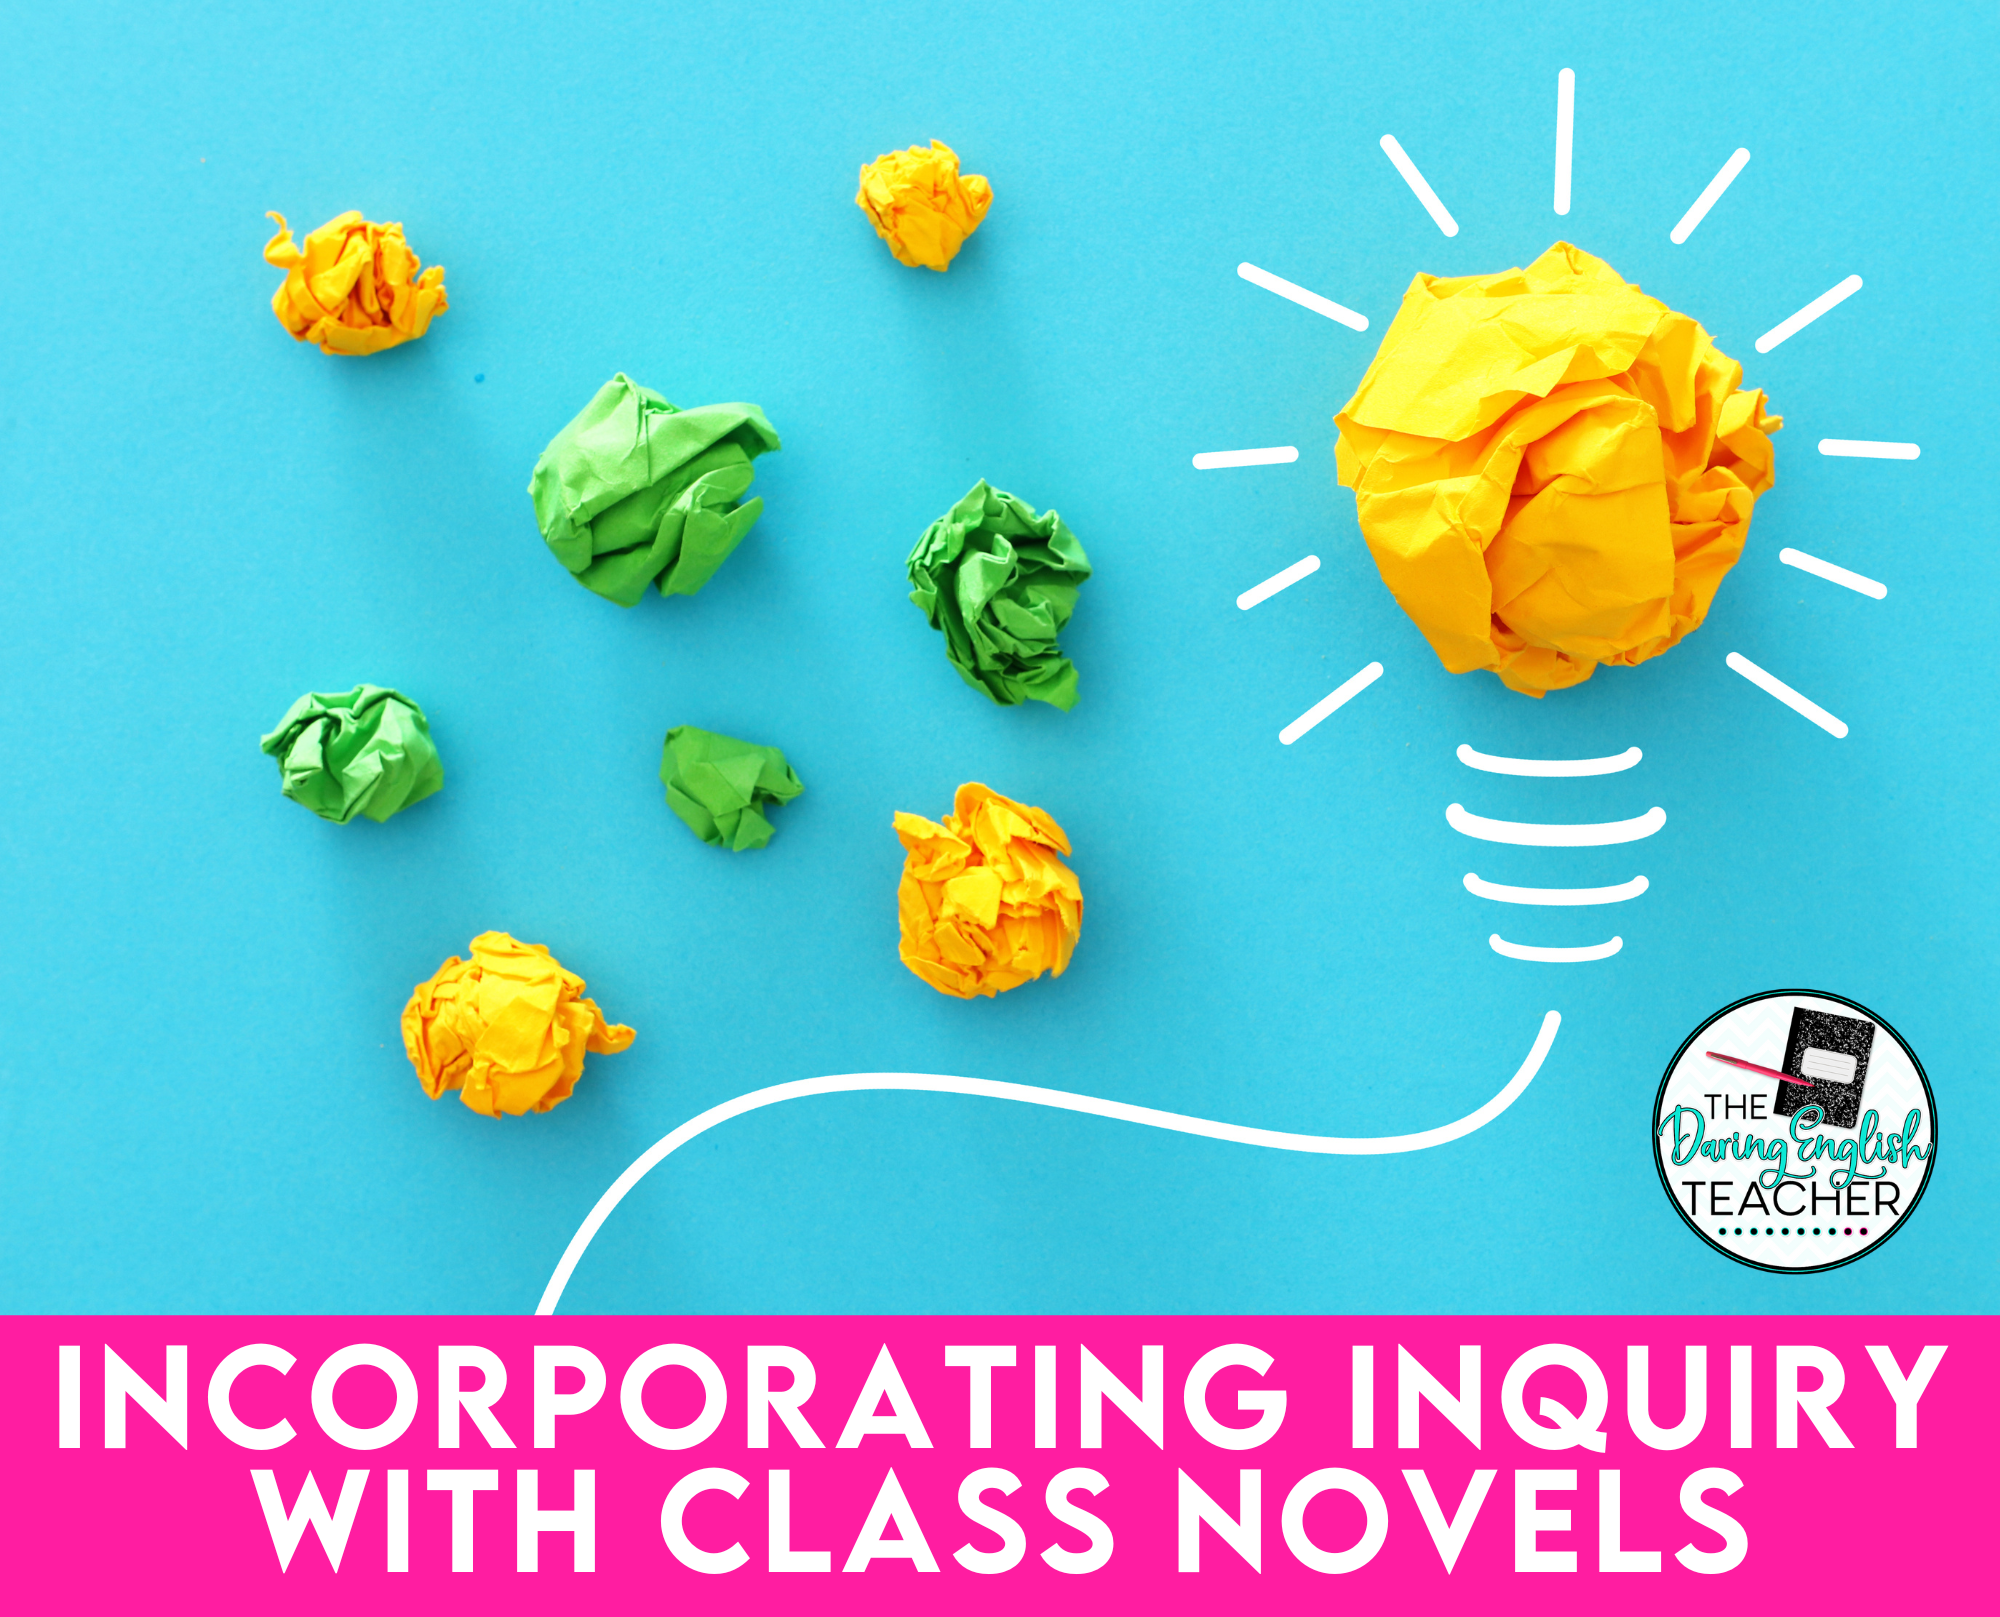 How to Incorporate an Inquiry-Based Approach with Class Novels